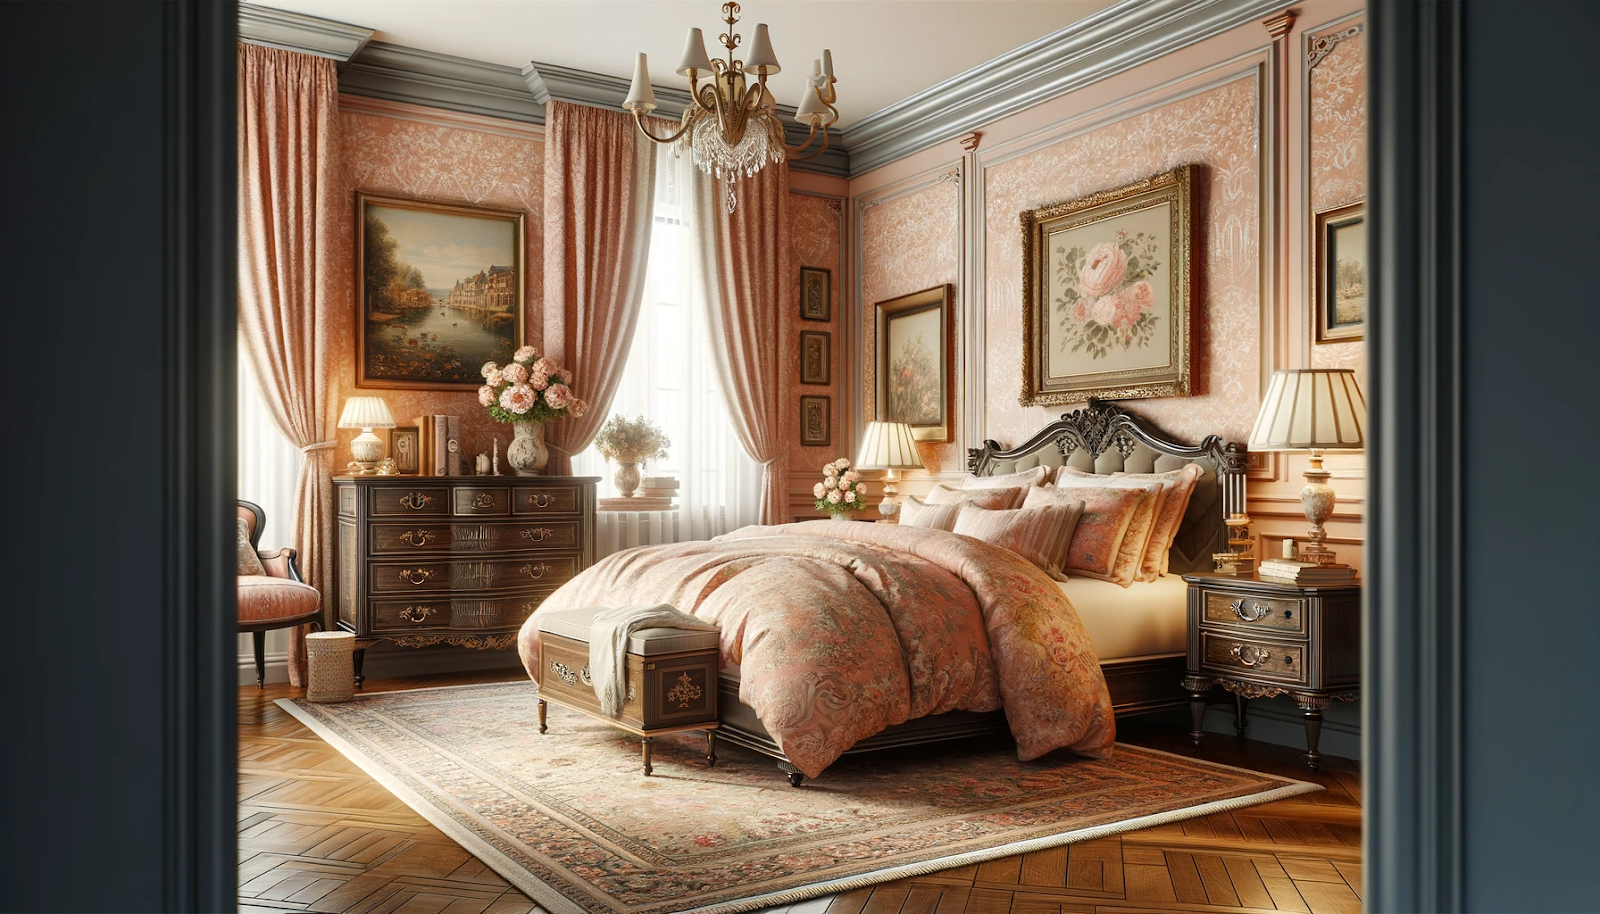 A very traditional bedroom with antique looking furniture in dark browns with peach fuzz colored wall paper and accents. There is a wooden floor and a chandelier over the bed along with artwork of florals and water scenes. Shows how to incorporate the color peach fuzz into a traditional style.